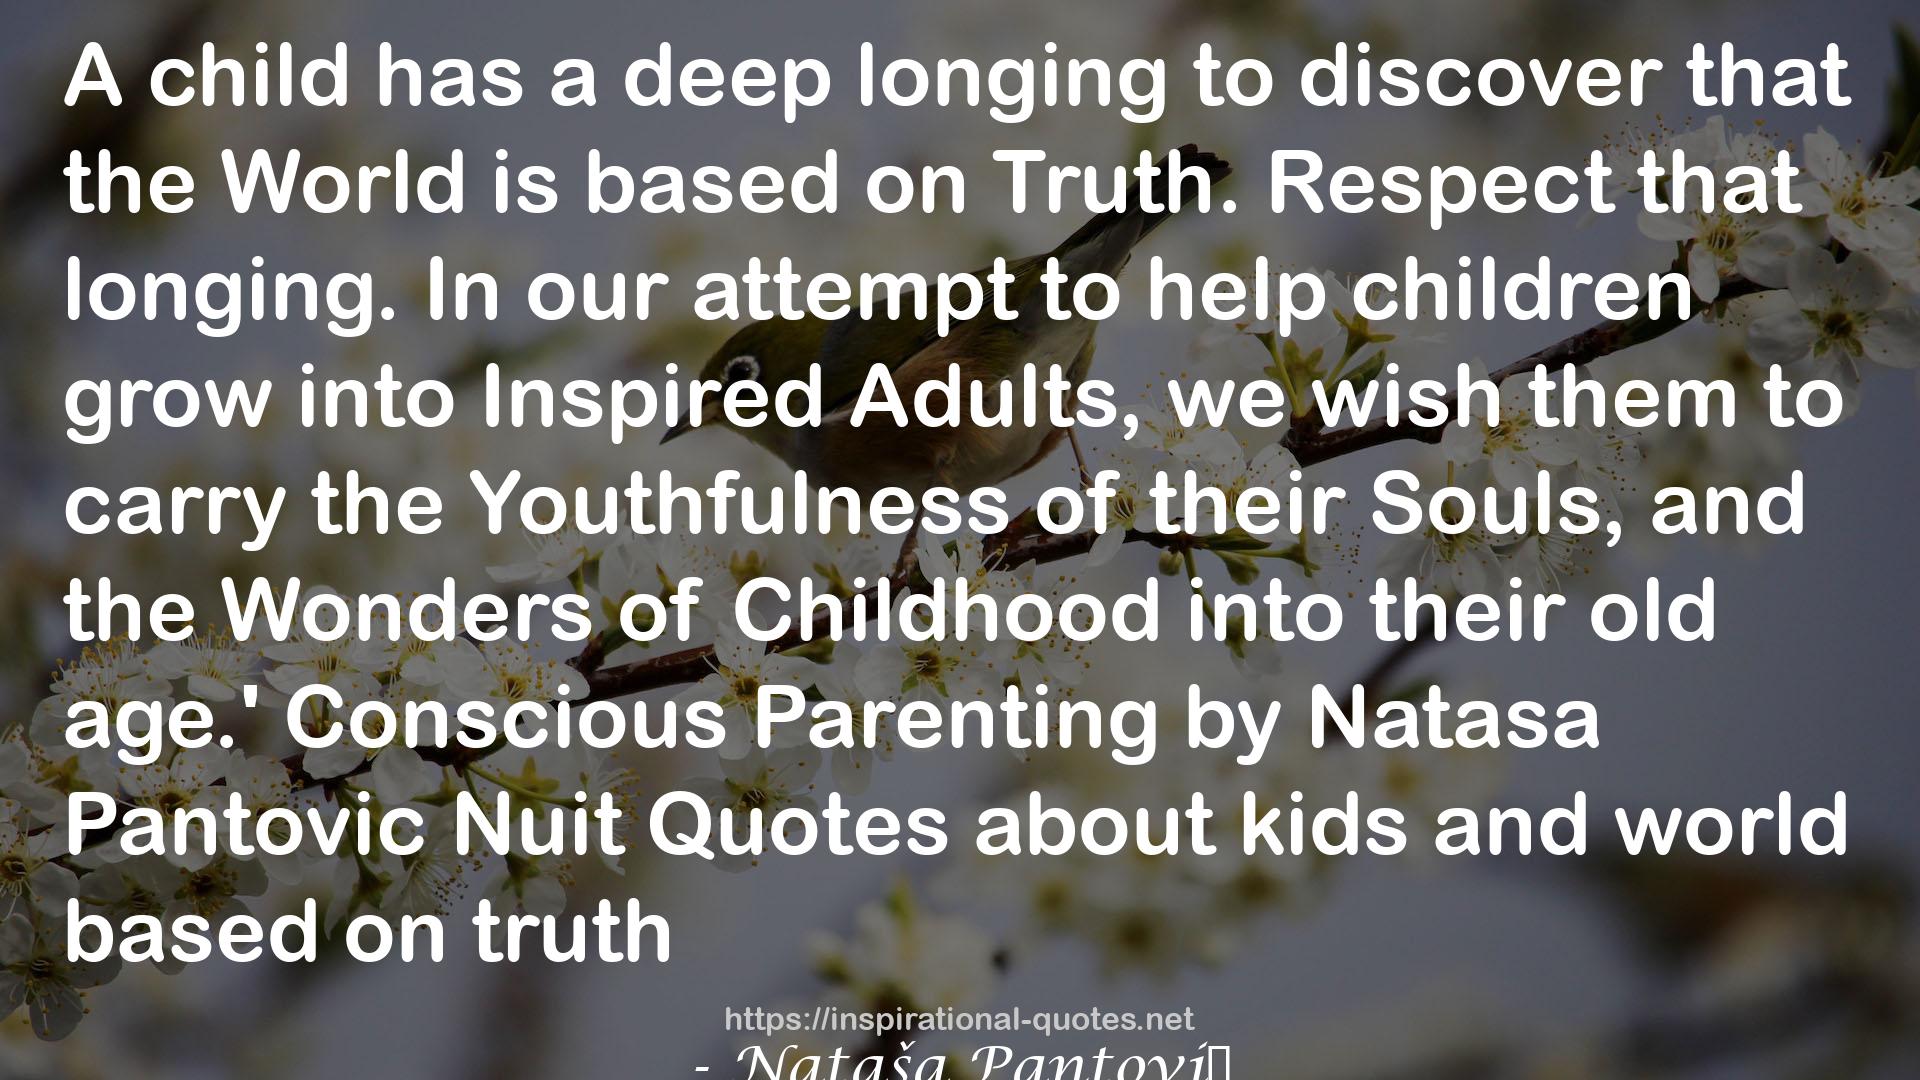 Conscious Parenting: Mindful Living Course for Parents (AoL Mindfulness #5) QUOTES